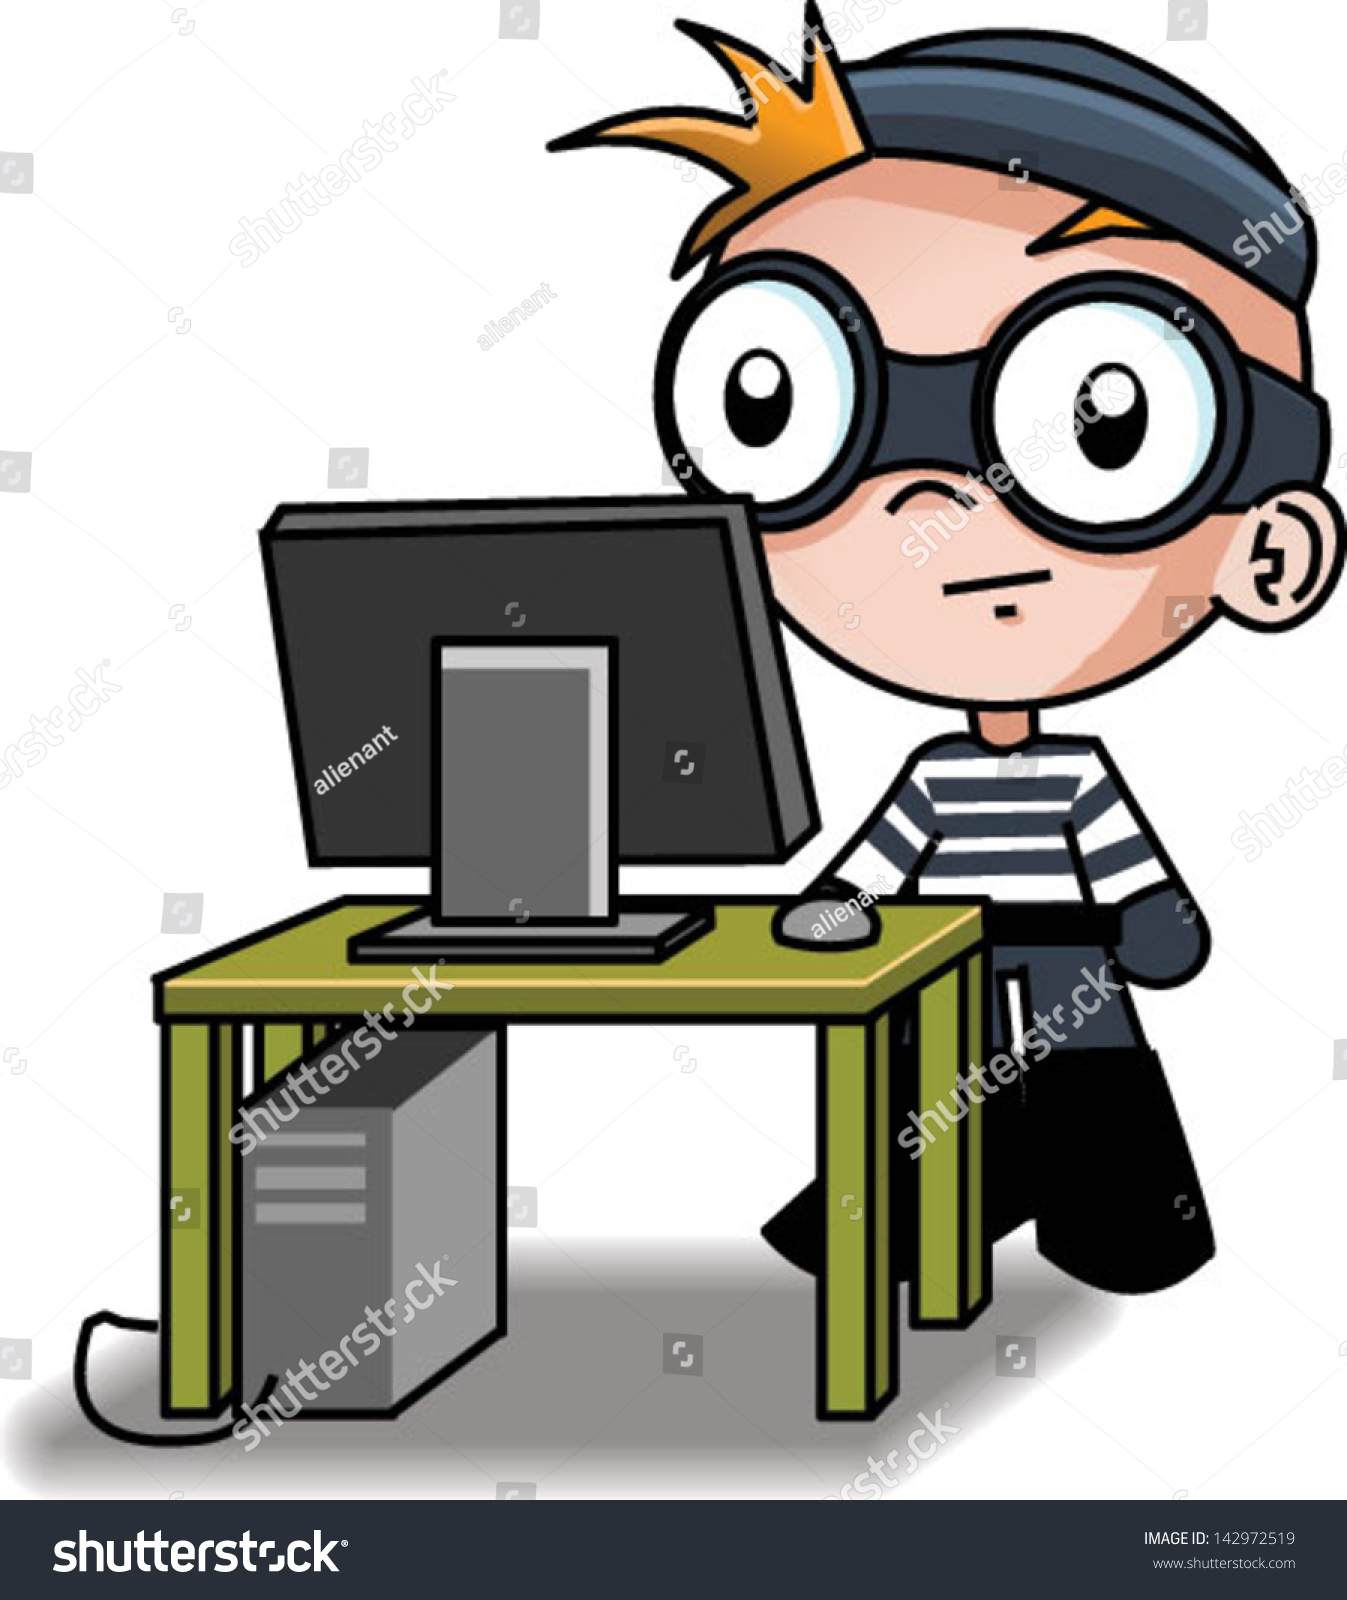 computer hacking clipart - photo #10